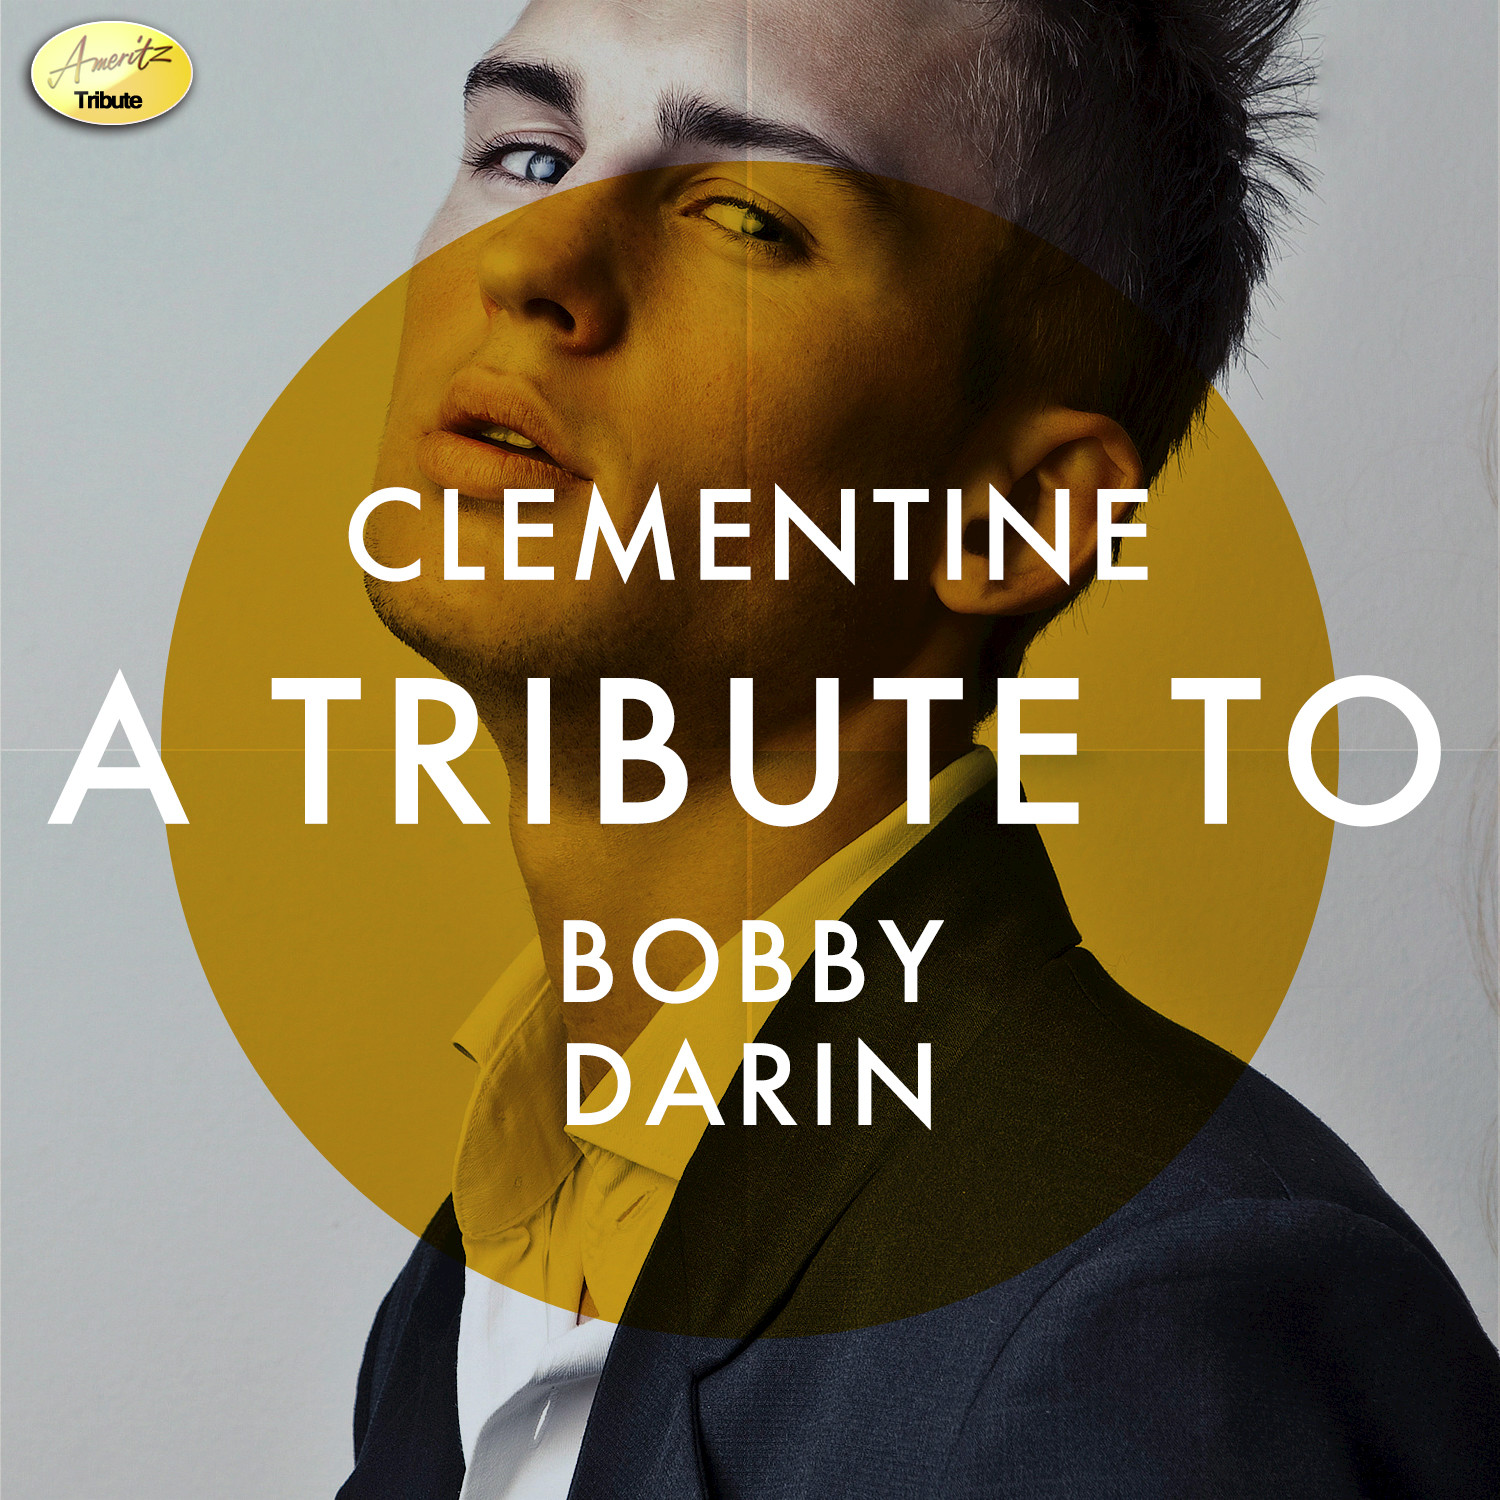 Clementine: A Tribute to Bobby Darin